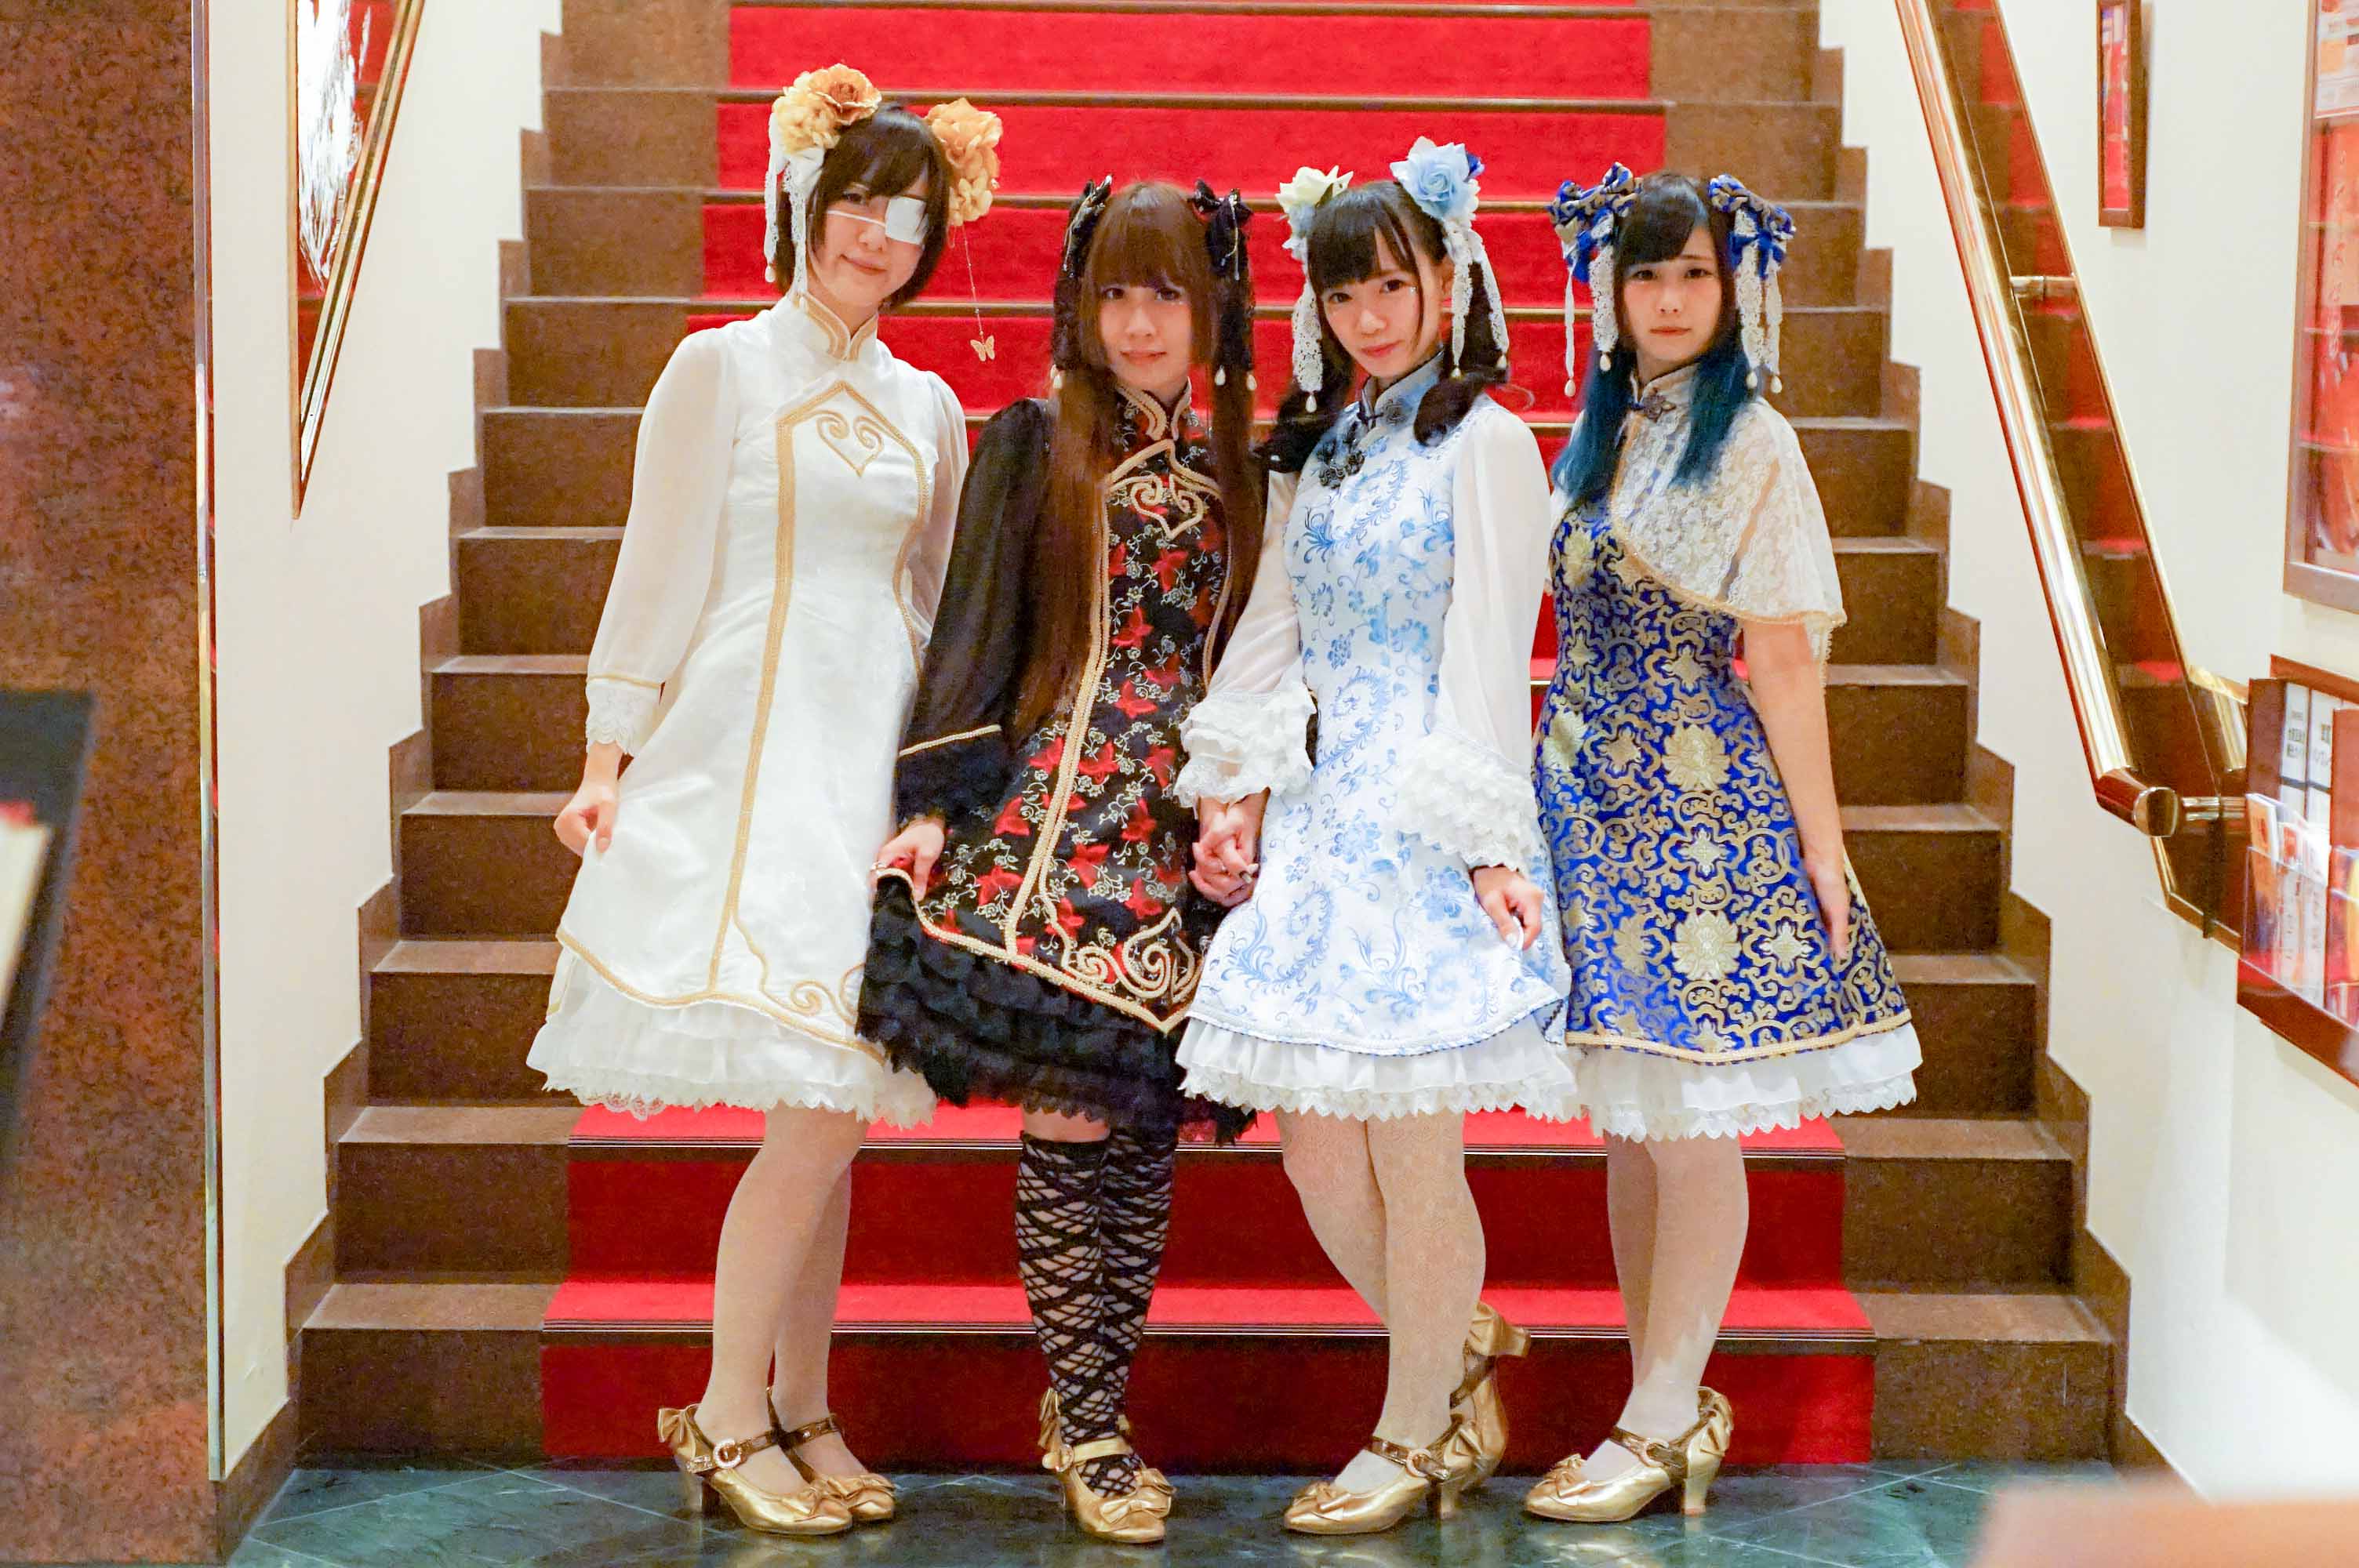 From left to right : Terachin, Risa, Rin, Amu 